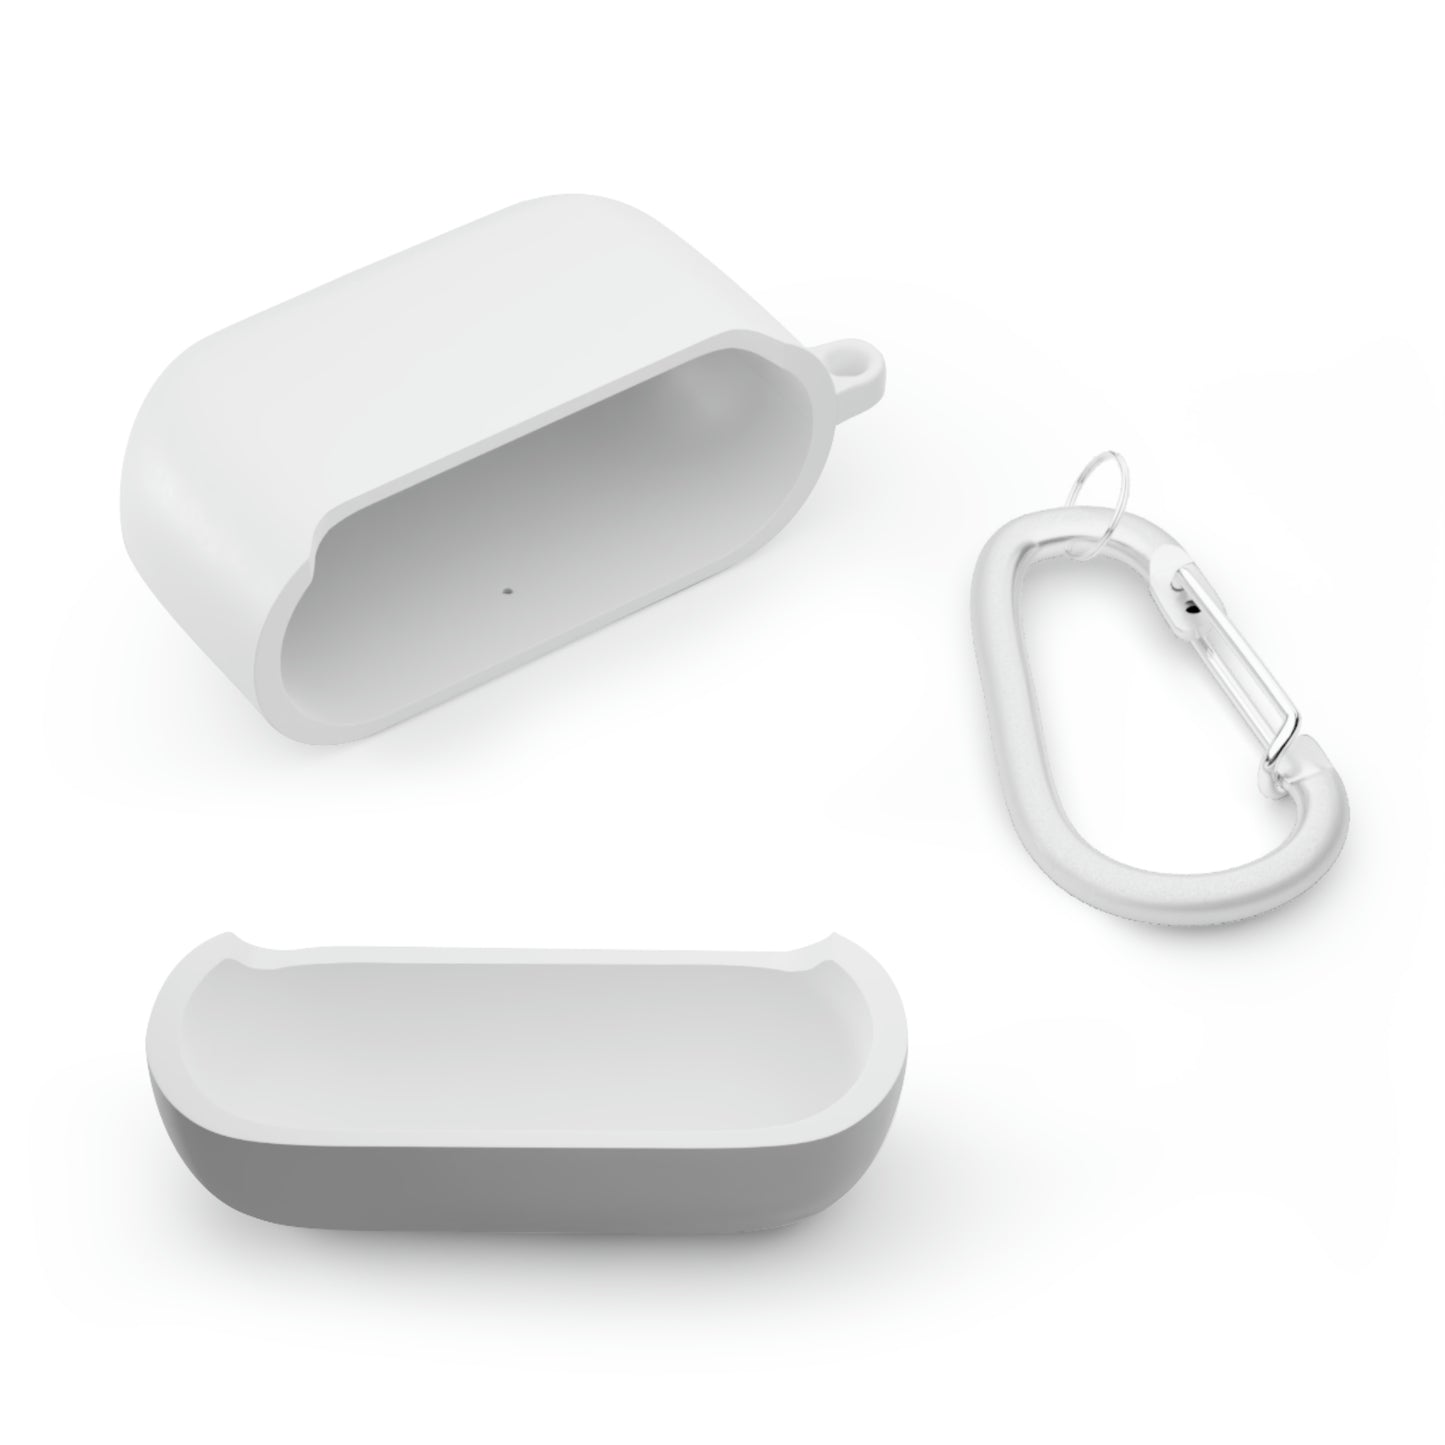 Renewed, Transformed, Claimed By God AirPods / Airpods Pro Case cover